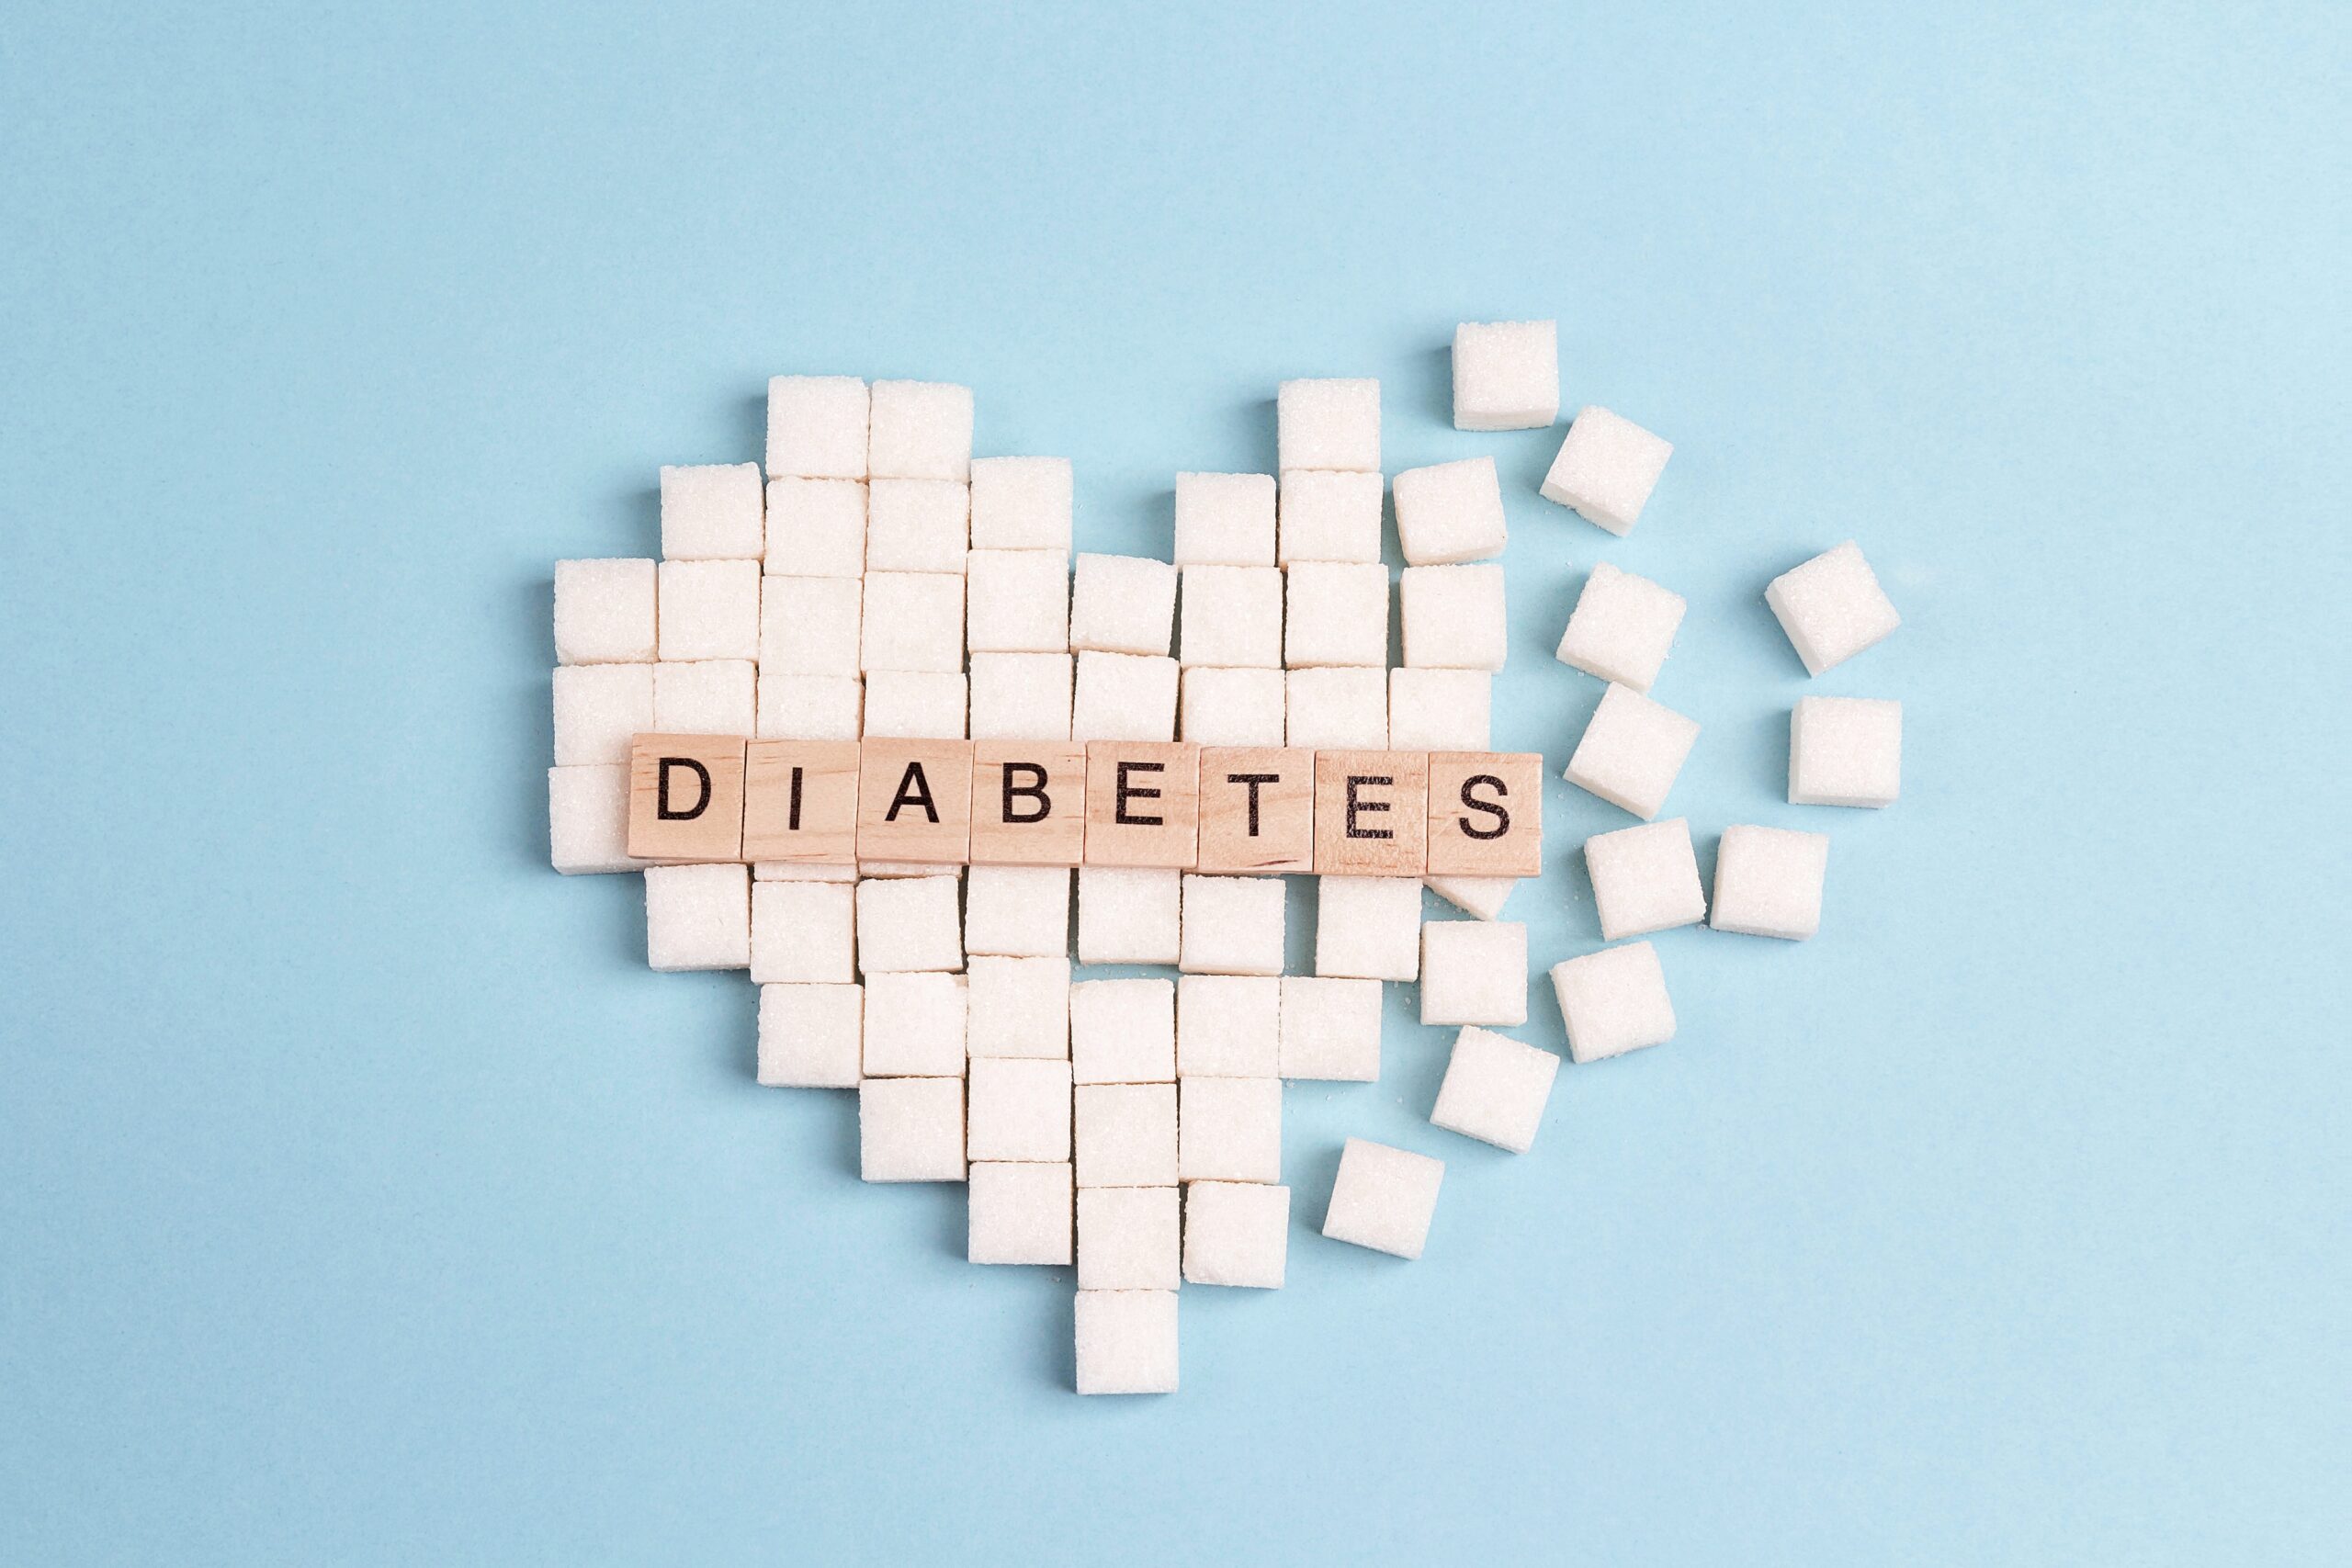 Diabetes: New drug for oral intake without side effects